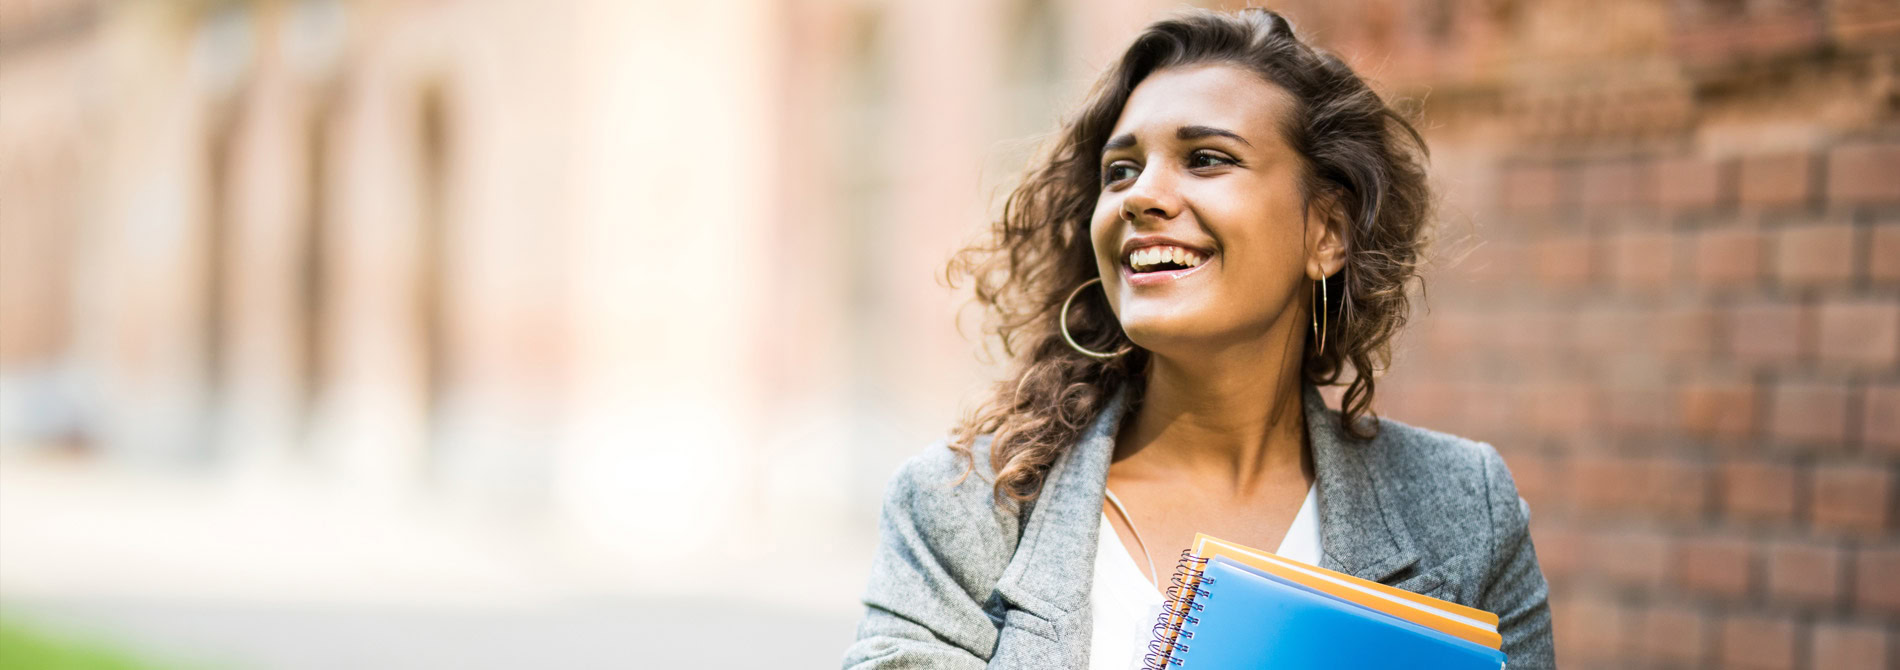 smiling woman in college